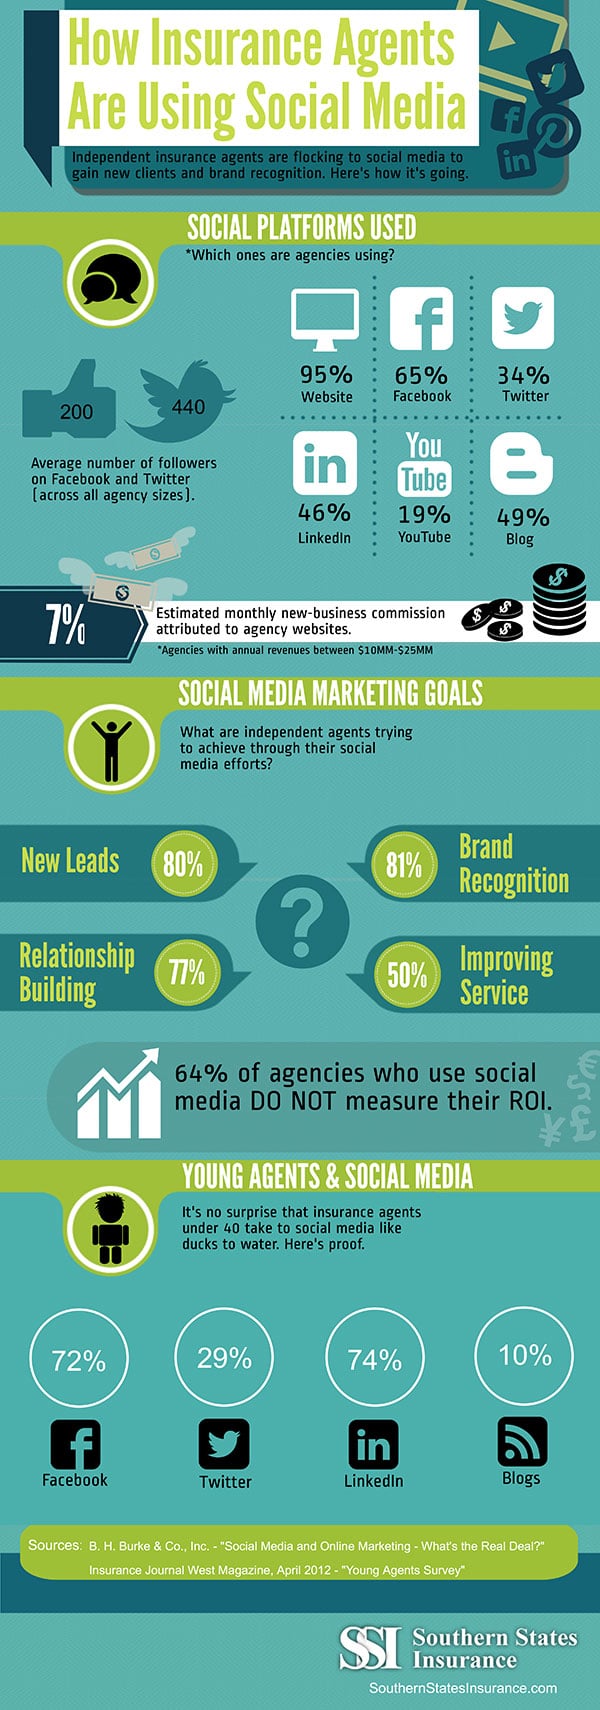 How insurance agents are using social media infographic